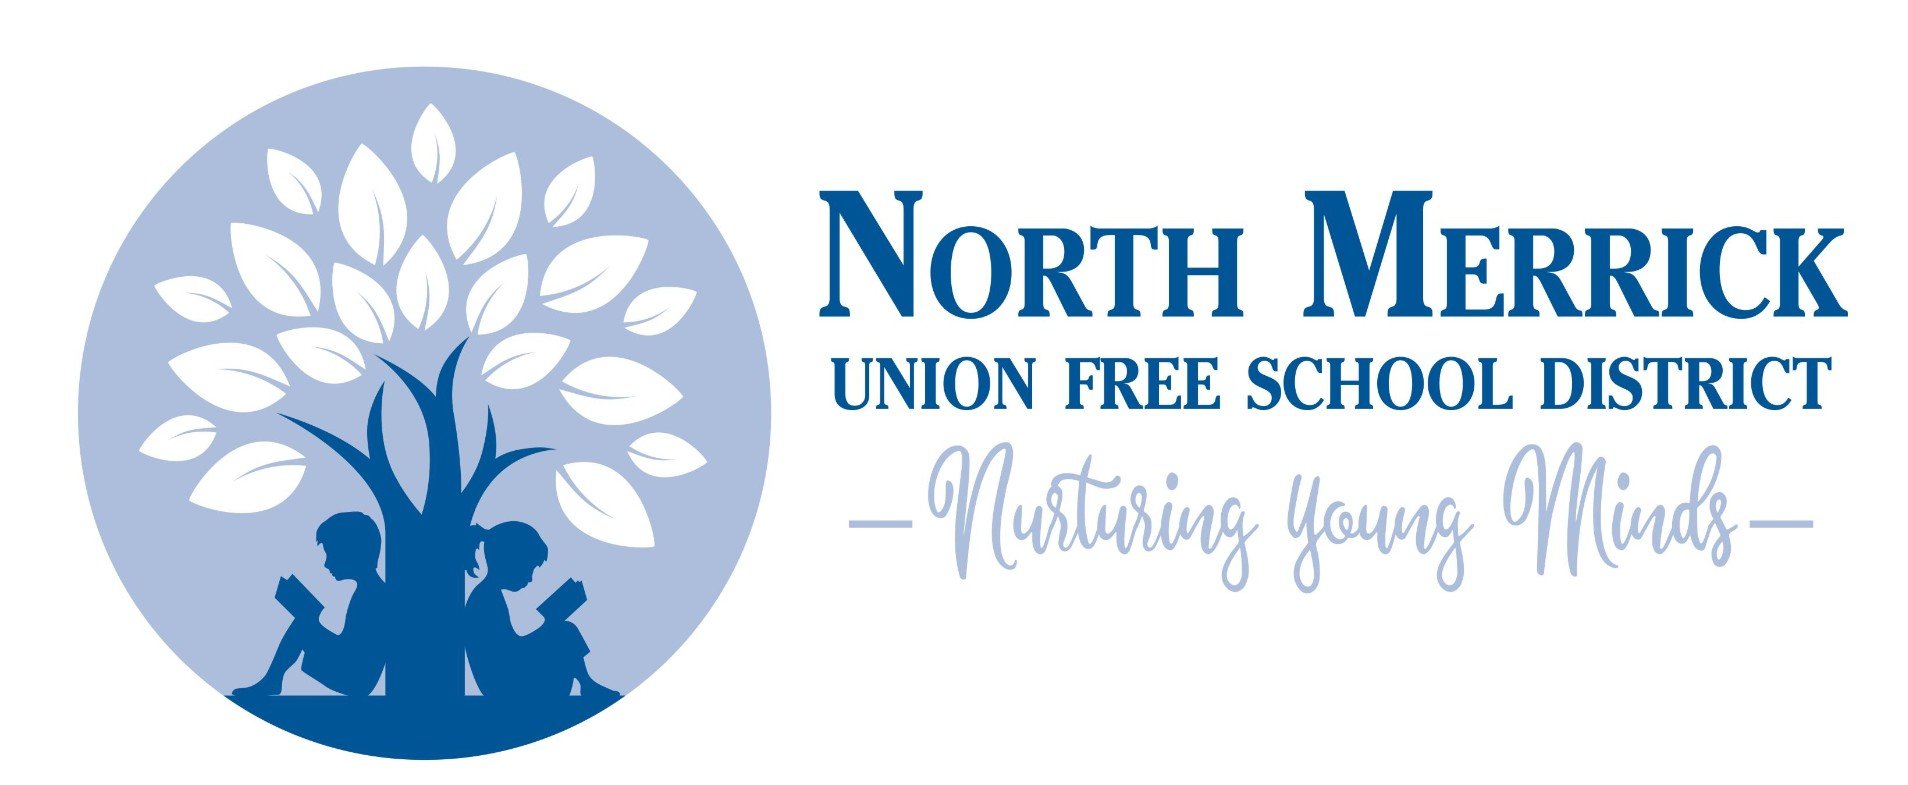 Welcome to the Twitter feed for the North Merrick School District, which includes Camp Avenue, Harold D. Fayette, and Old Mill Road Elementary Schools!